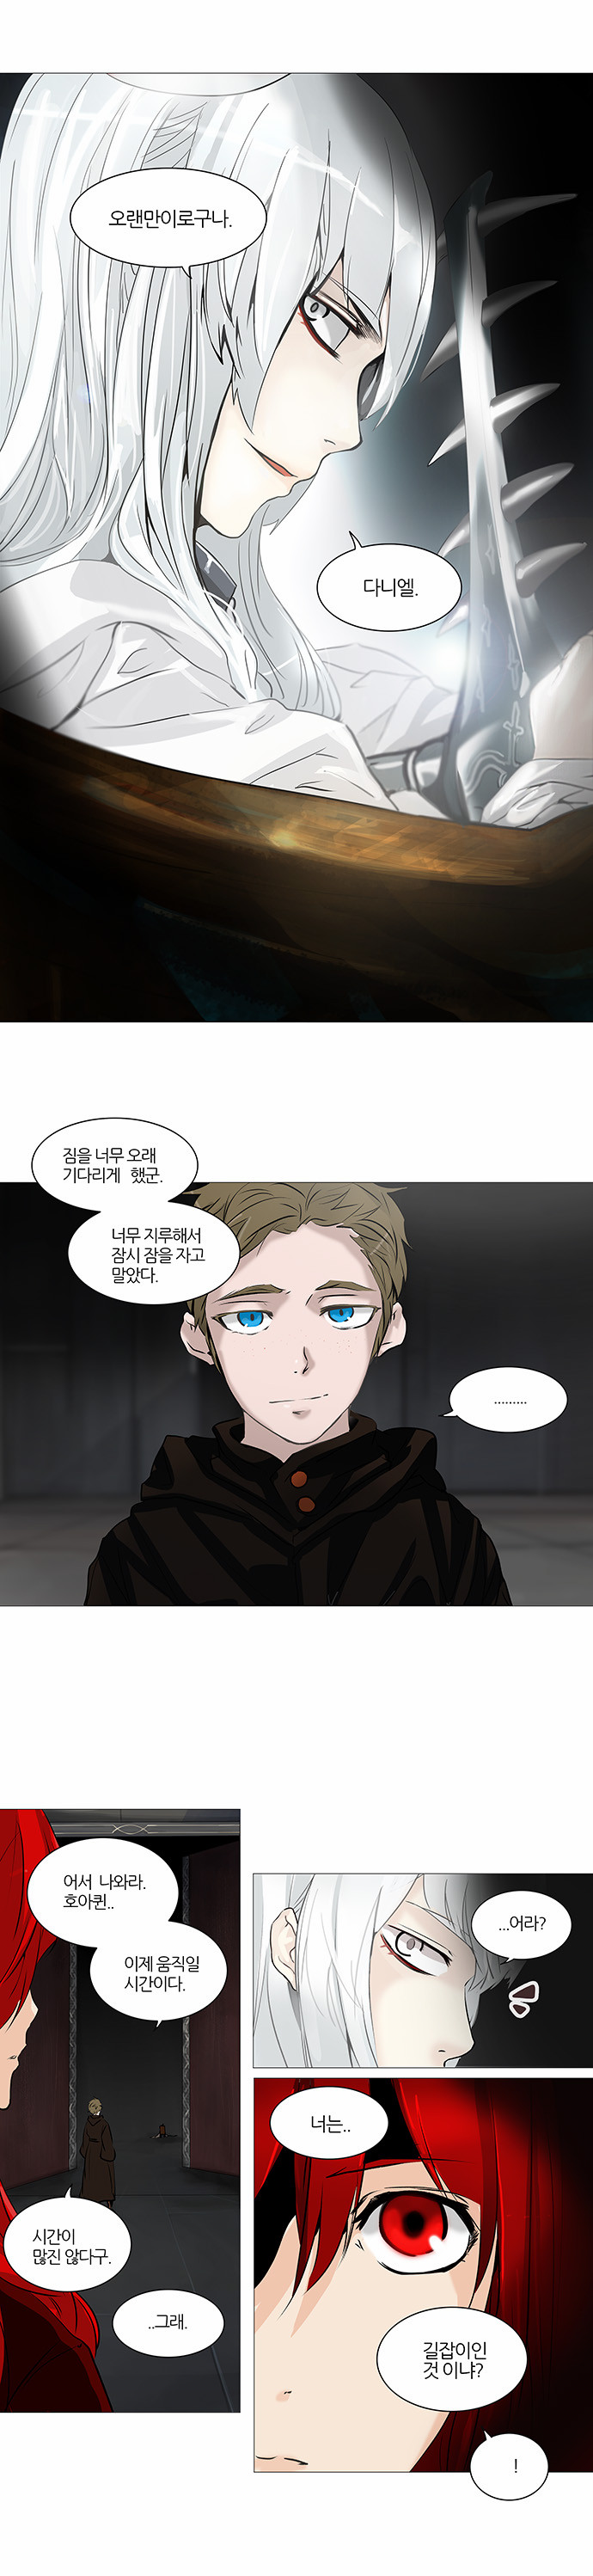 Tower of God - Chapter 239 - Page 1